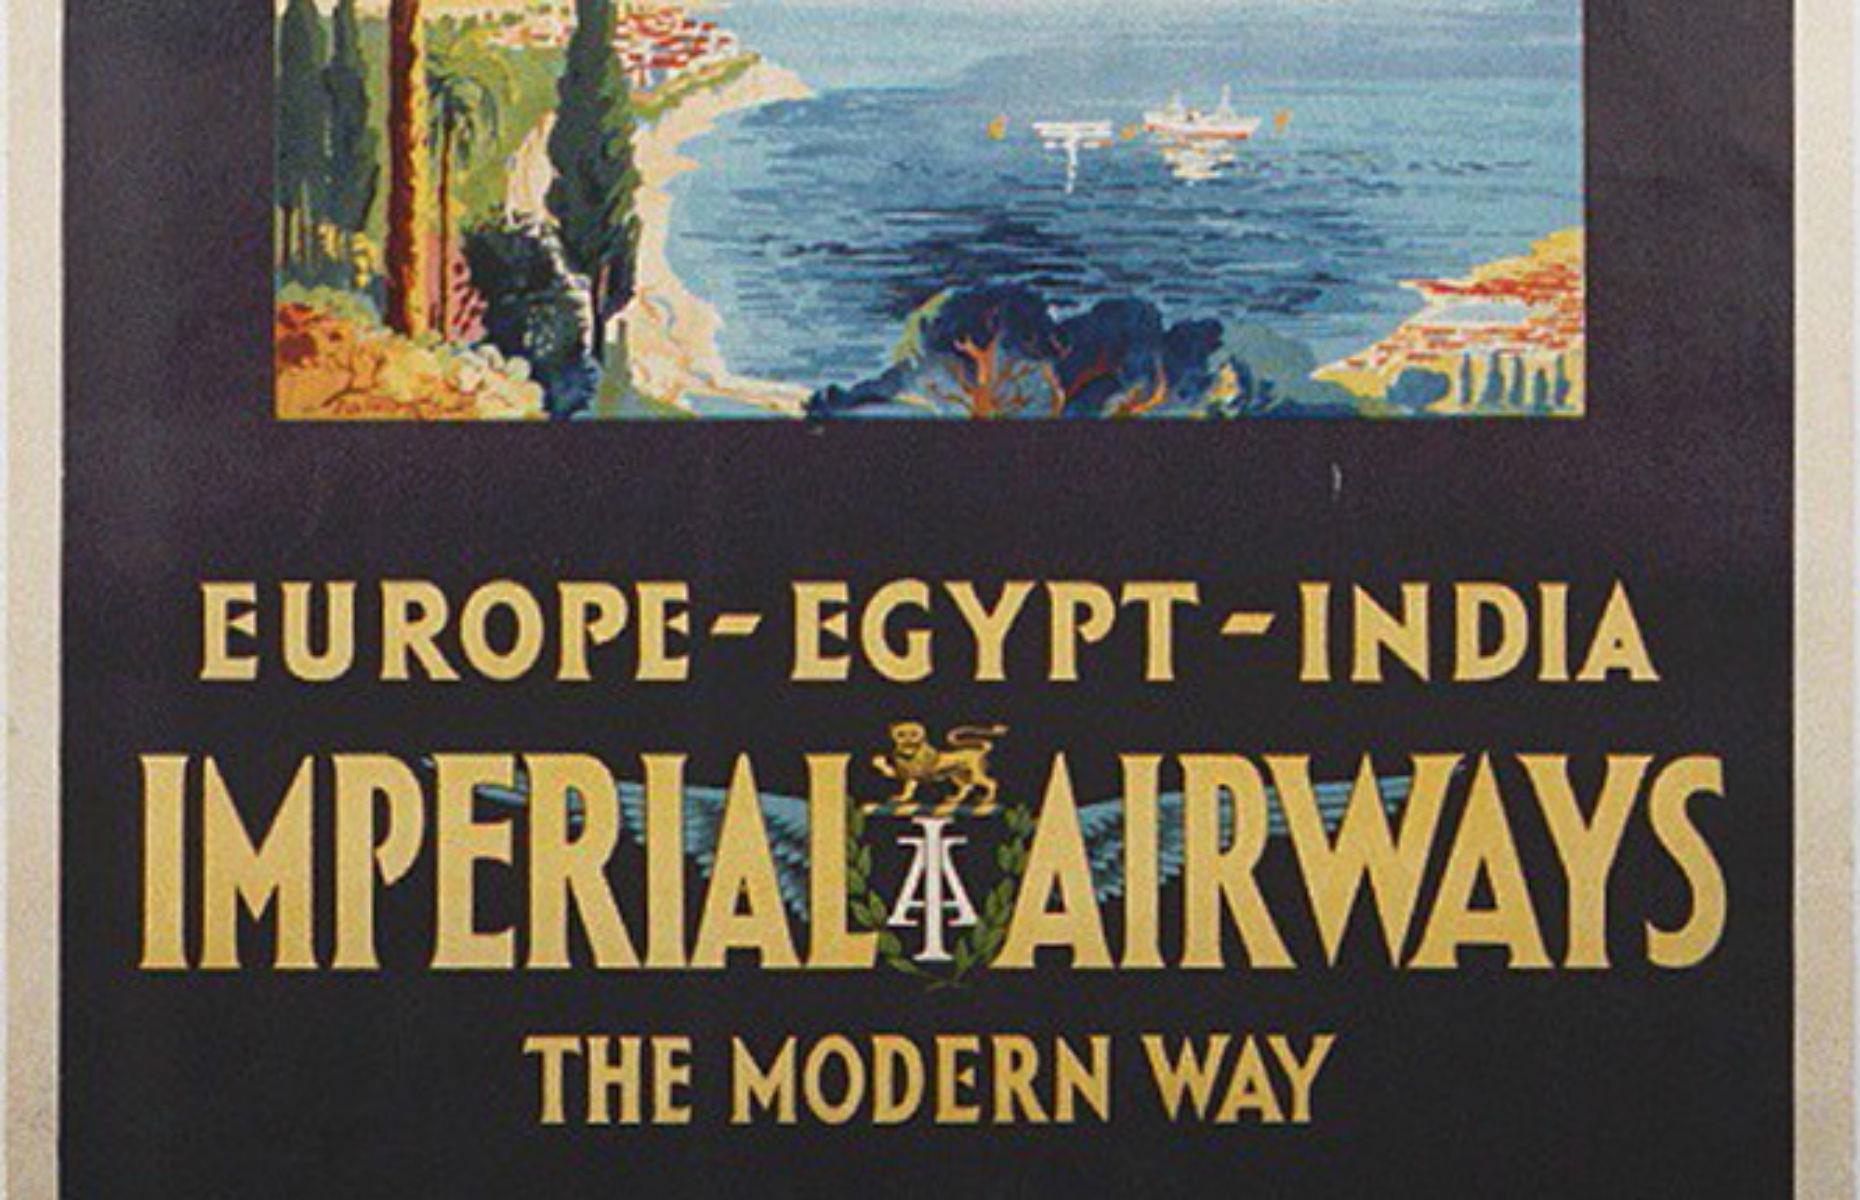 <p>According to <em>The Golden Age of Air Travel</em> by Nina Hadaway, 1927 saw the launch of the world’s first truly luxurious air service, courtesy of Imperial Airways. Their “Silver Wing” service was super-exclusive, seeing a steward dressed in a white jacket, bow tie and cap serving pre-cooked, heated food to passengers. The presentation was second to none, with fine china, small tables with linen tablecloths, silver cutlery and crystal glasses.</p>